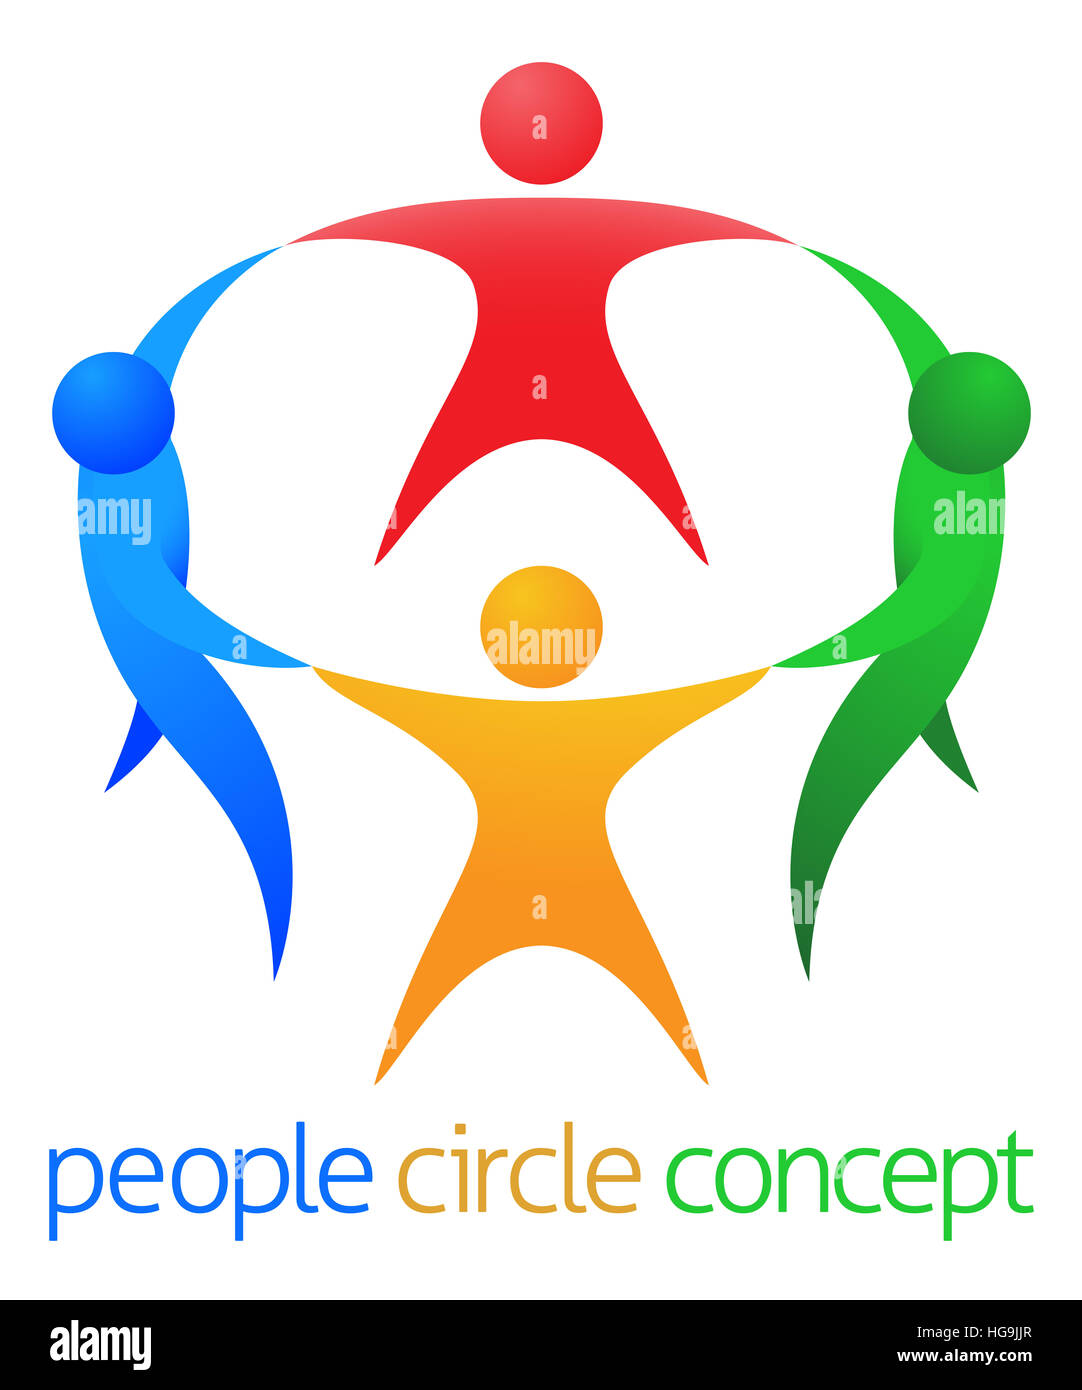 A team of four people in a circle teamwork icon concept Stock Photo - Alamy